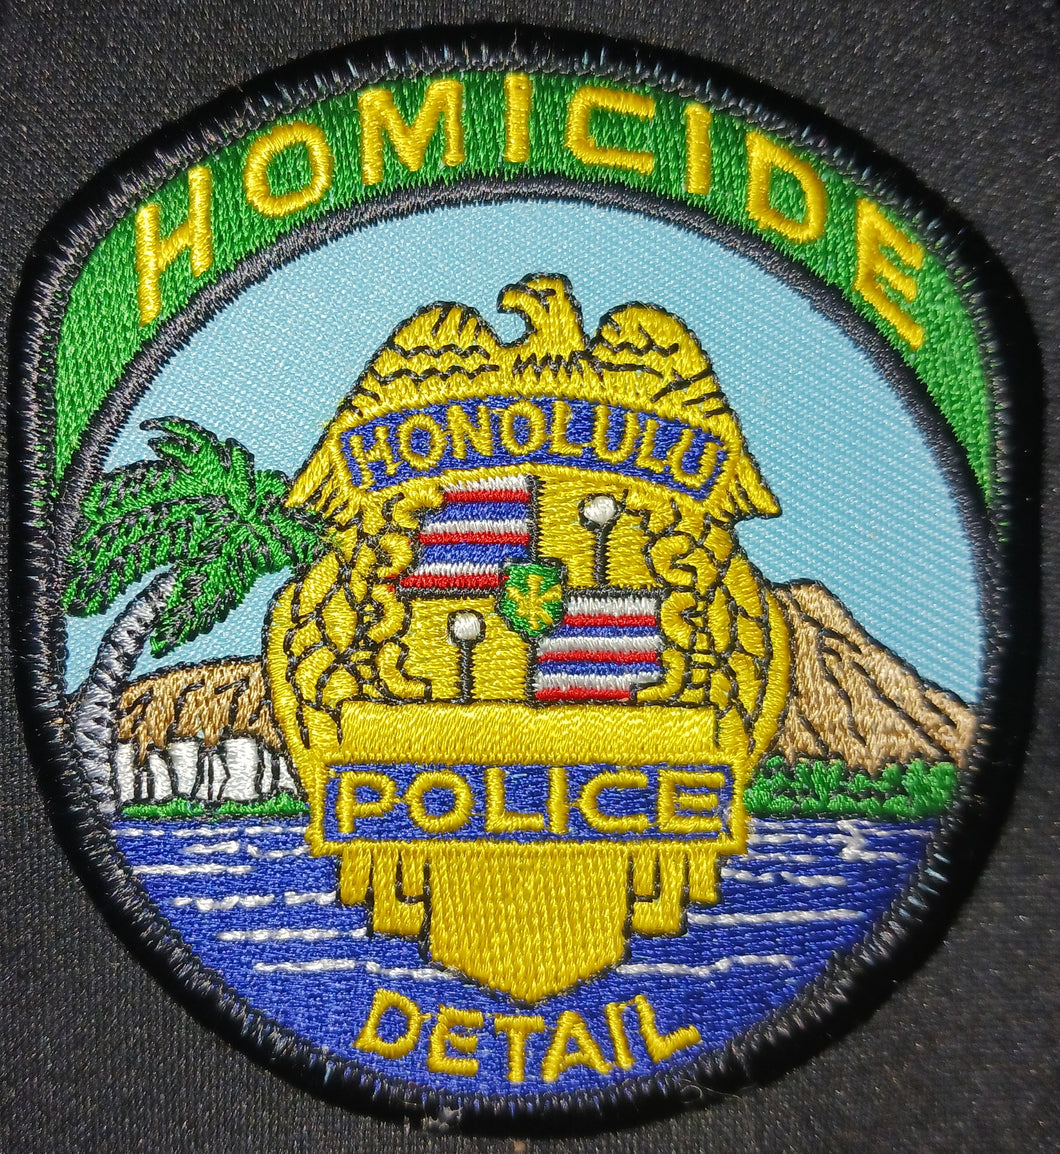 Honolulu Hawaii Homicide Police Detail Vintage Cloth Sew On Patch Law Enforcement